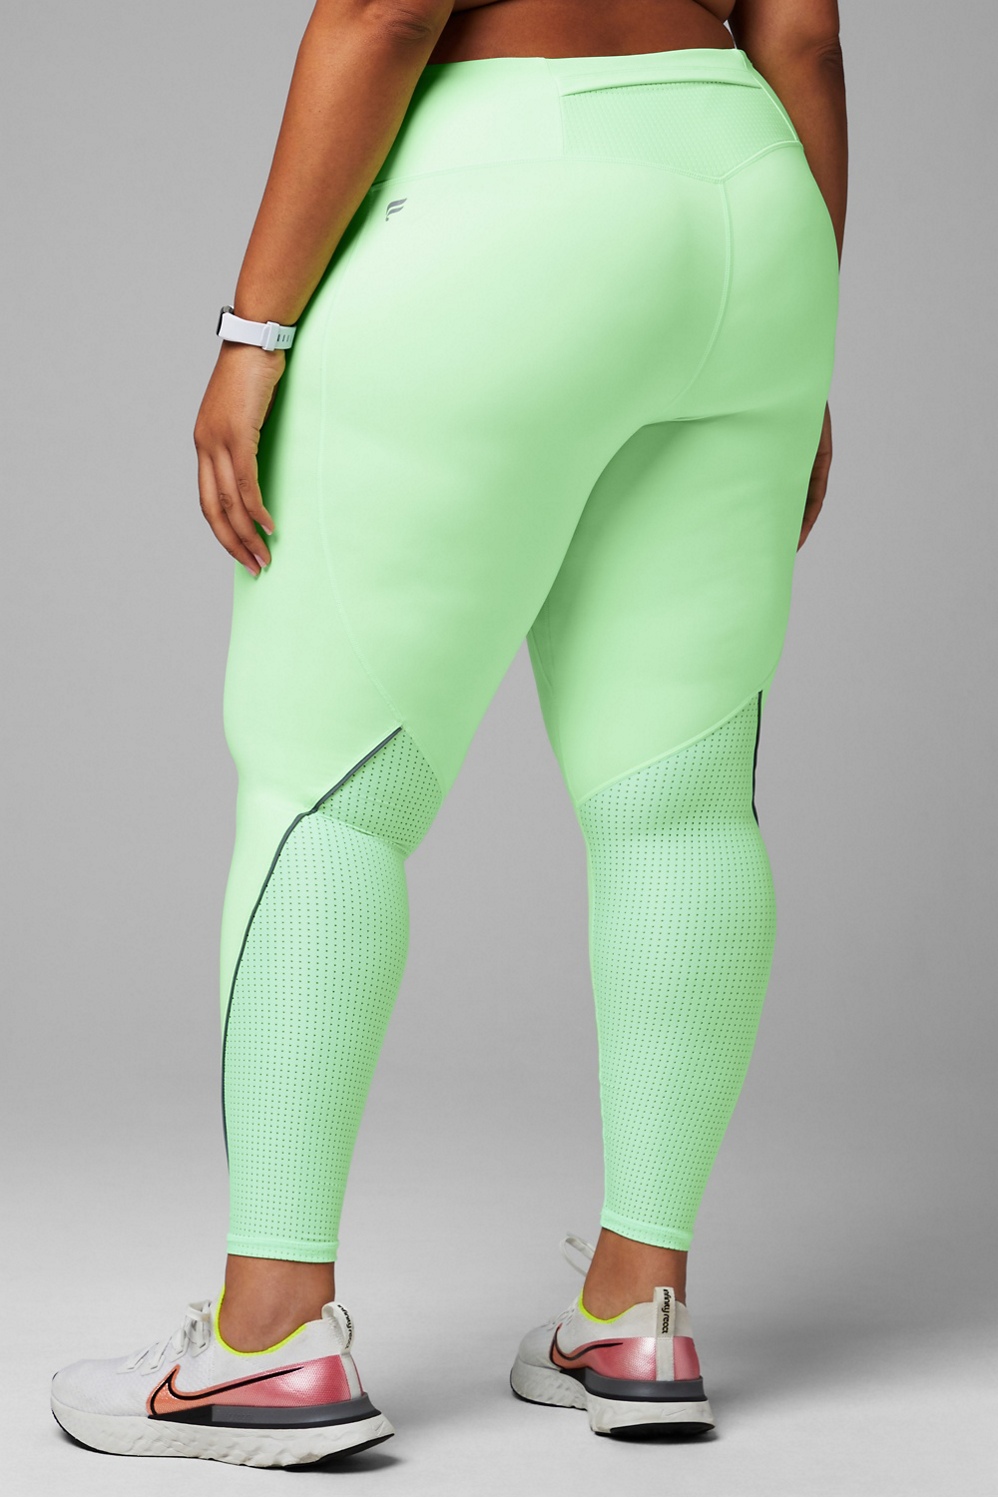 Fabletics NWT Motion365 Ultra High-Waisted Contrast Legging Size Small -  $54 New With Tags - From Hayley